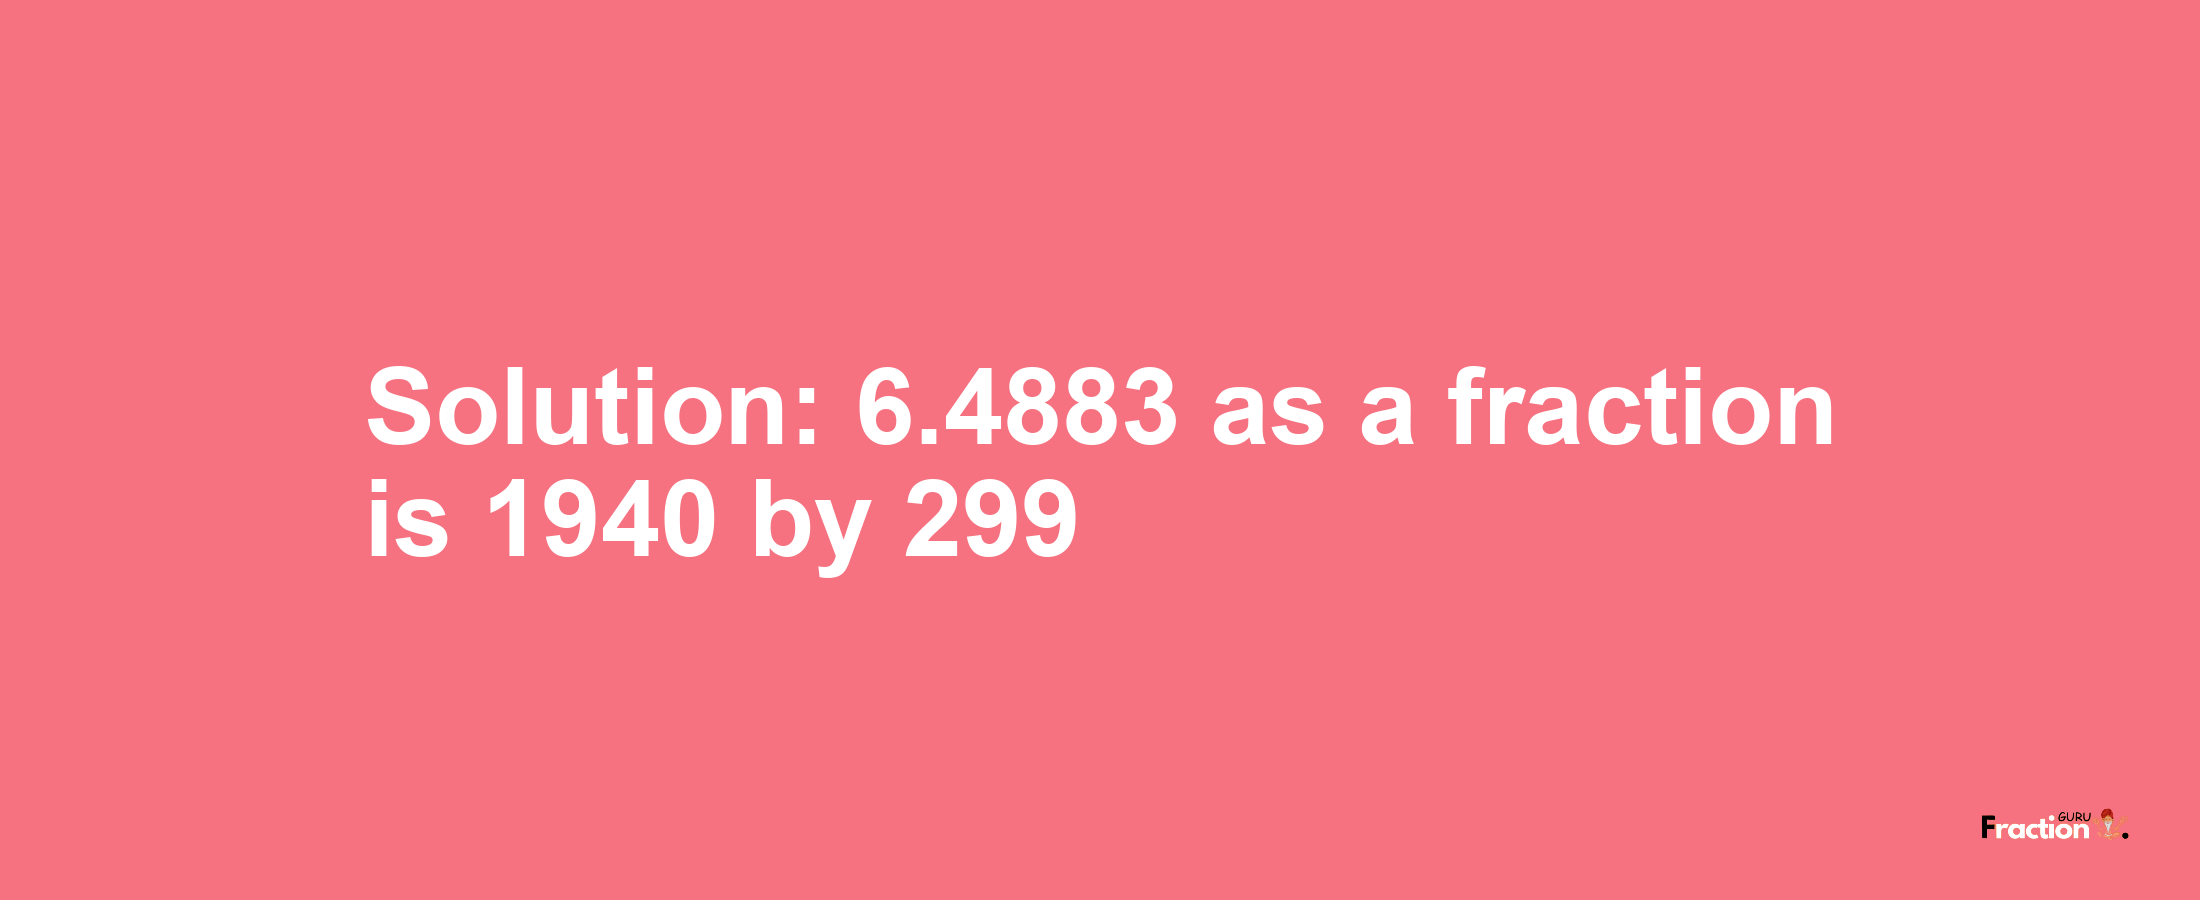 Solution:6.4883 as a fraction is 1940/299